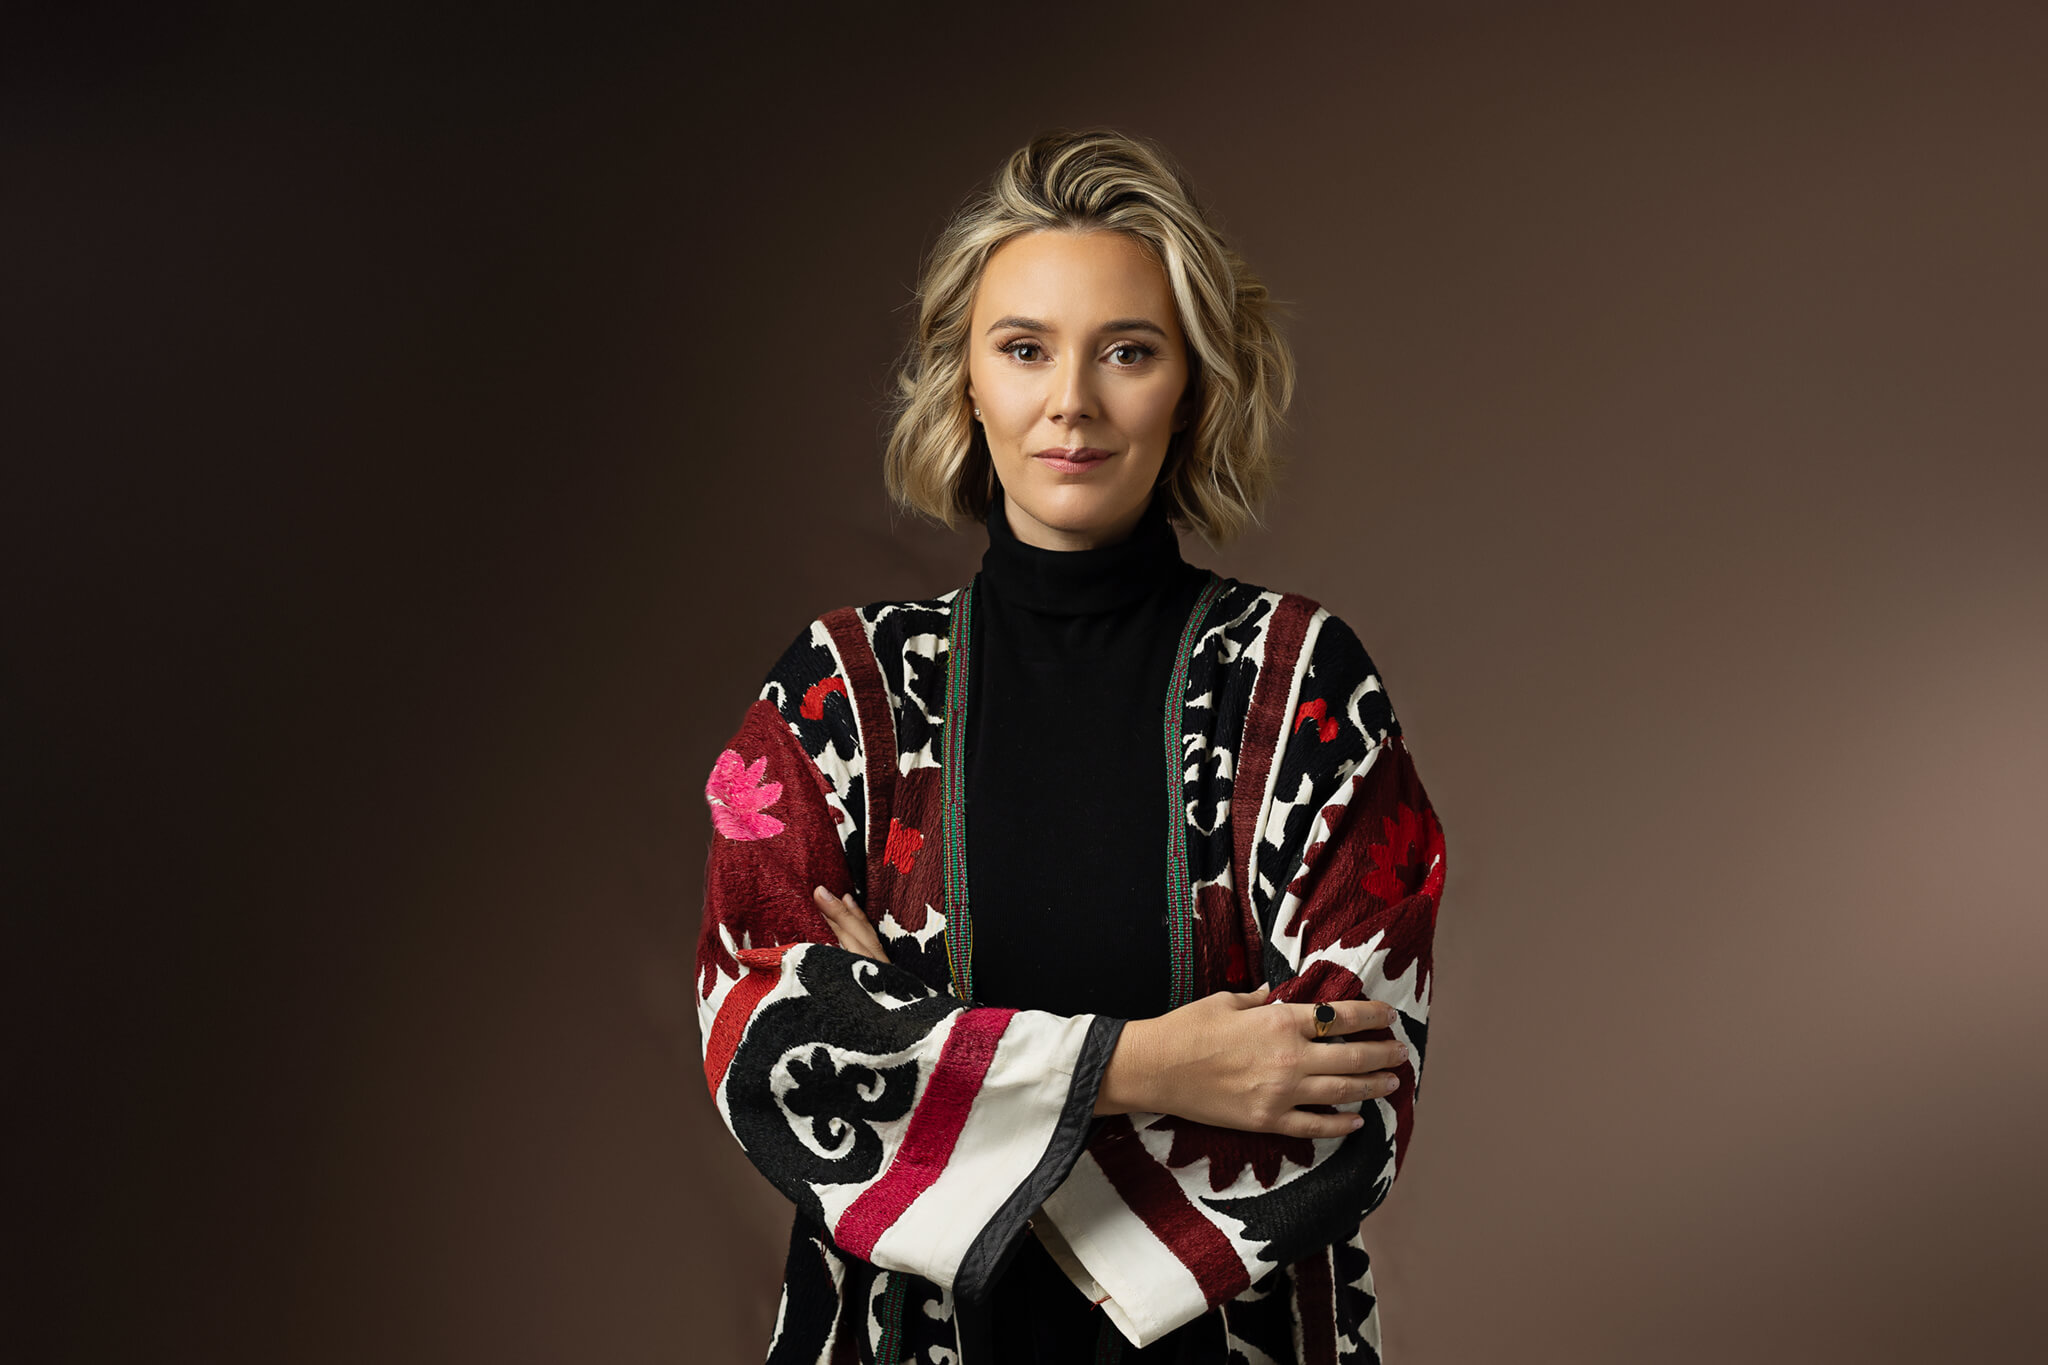 A woman with short blonde hair stands in a studio in a designer jacket smiling with arms crossed after visiting austin hair salons